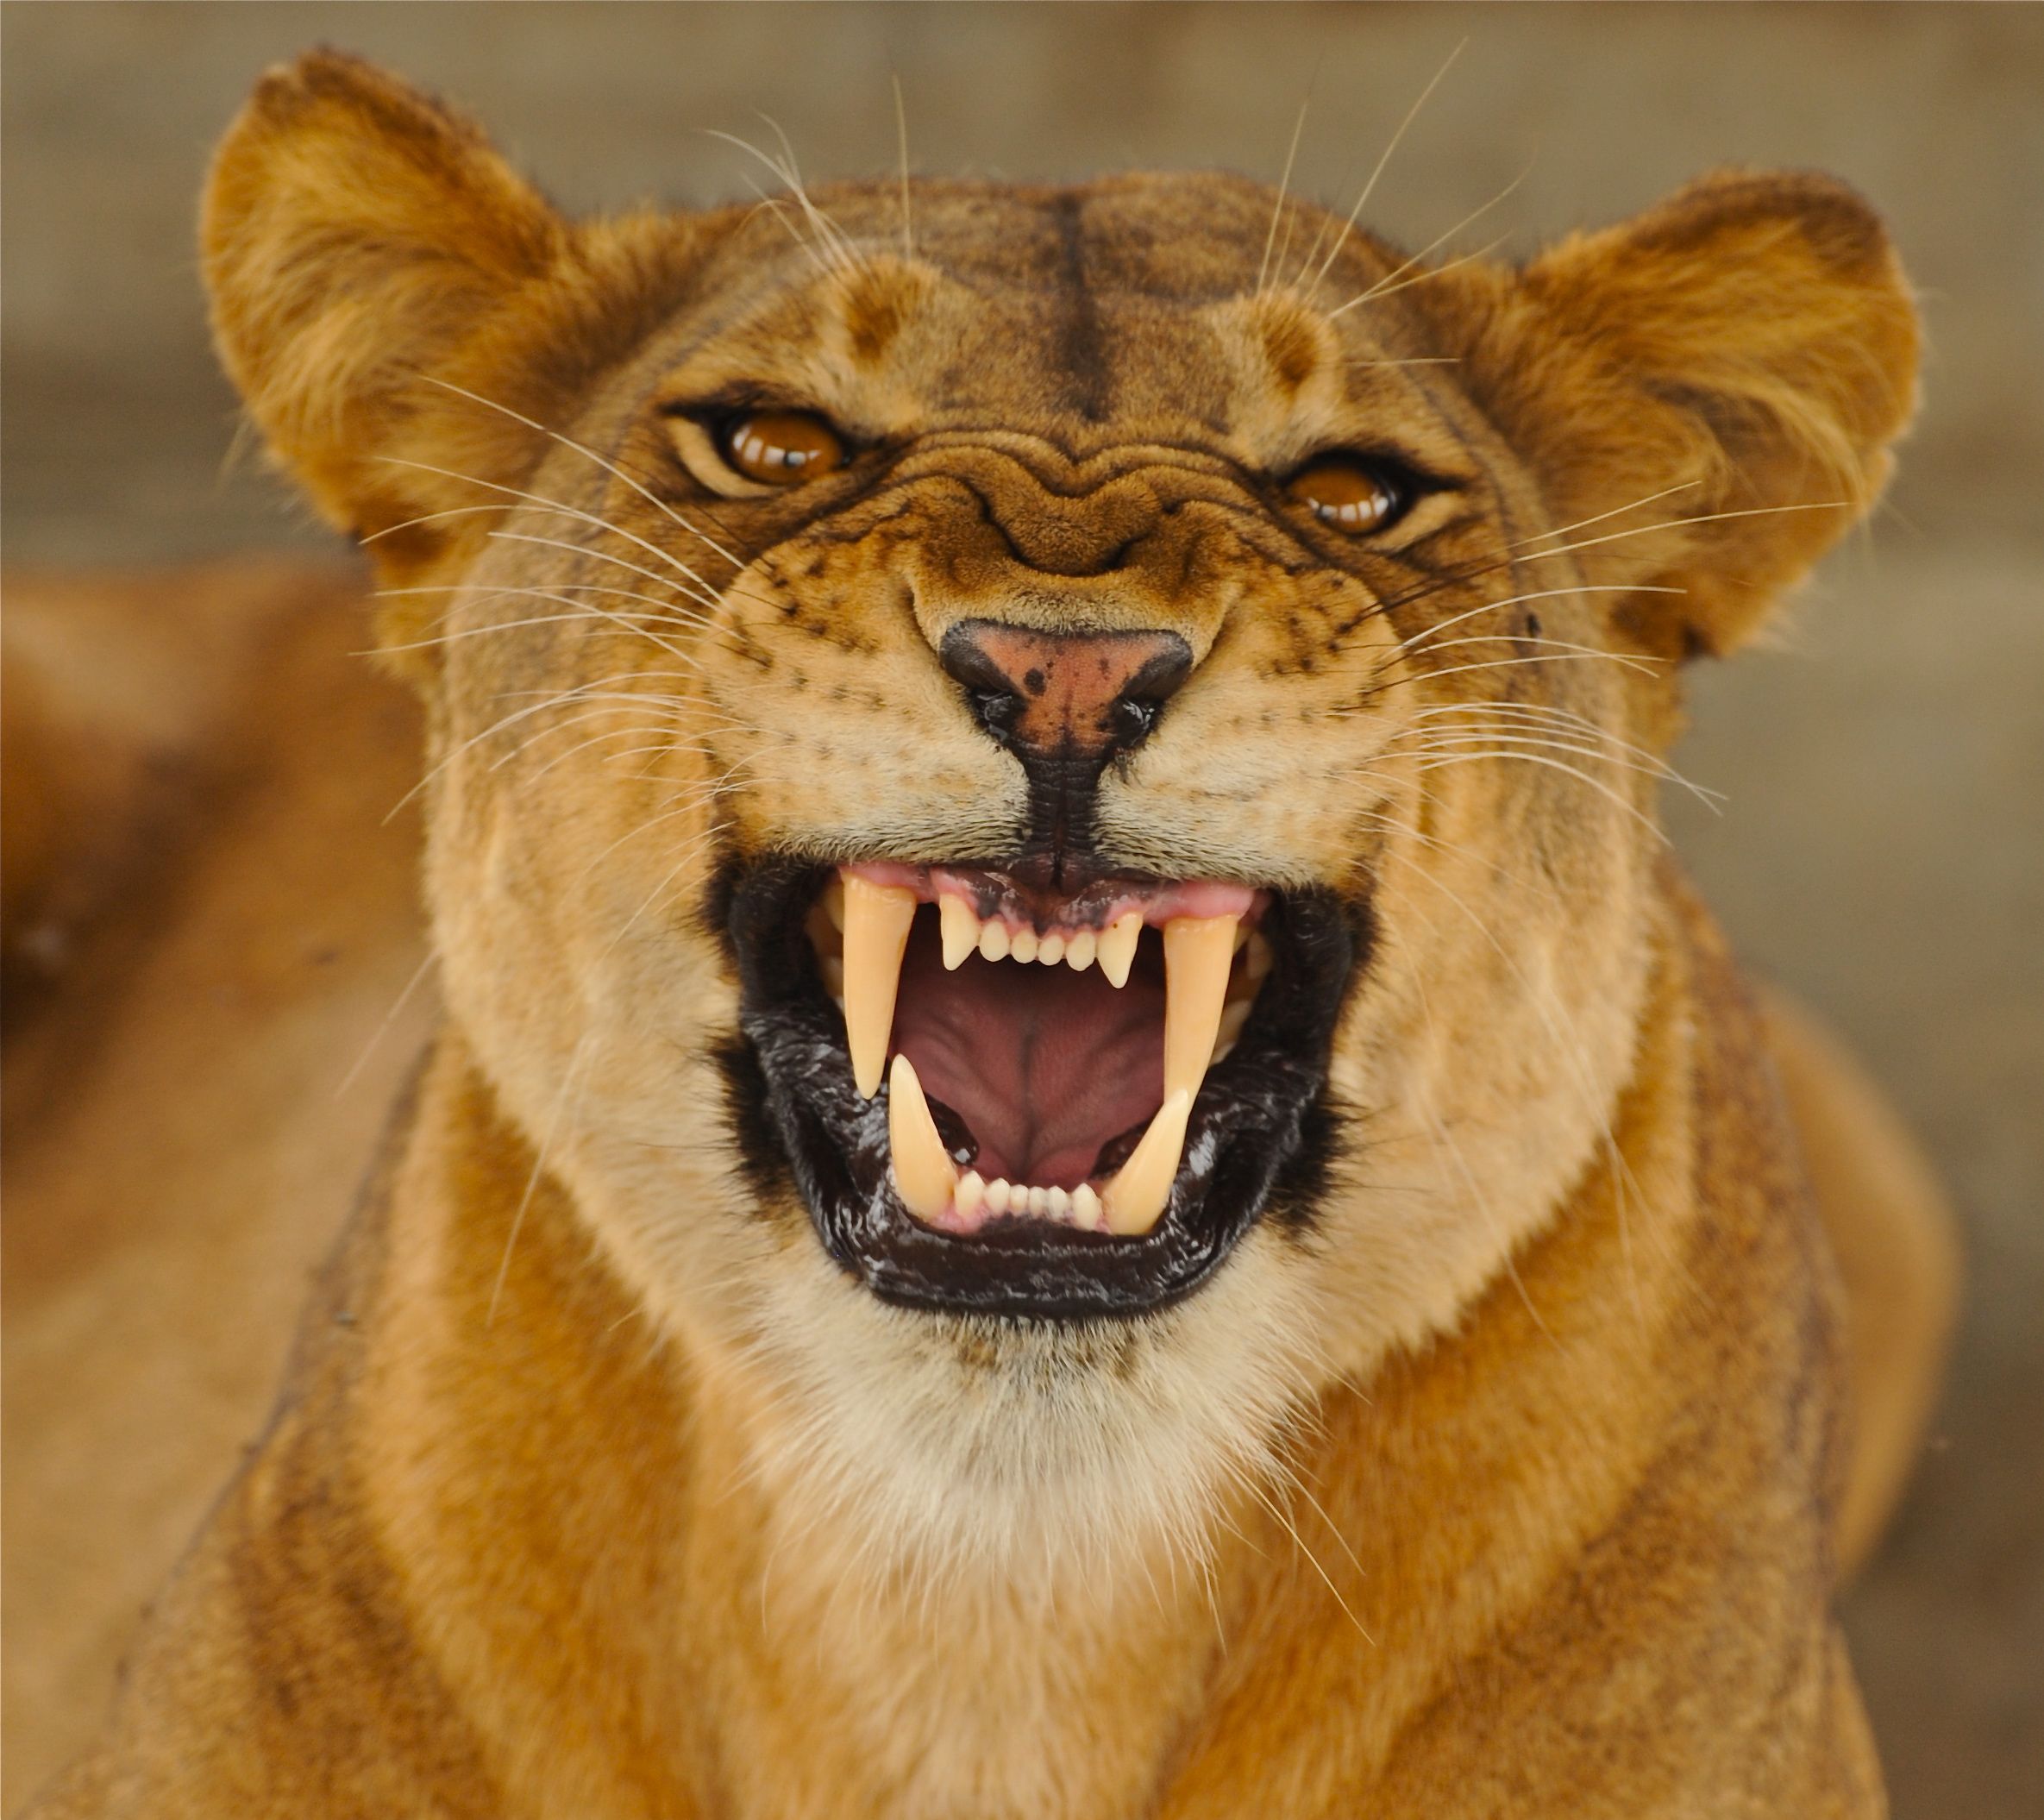 Image gallery for : snarling lioness | dragon | Pinterest | Lions ...